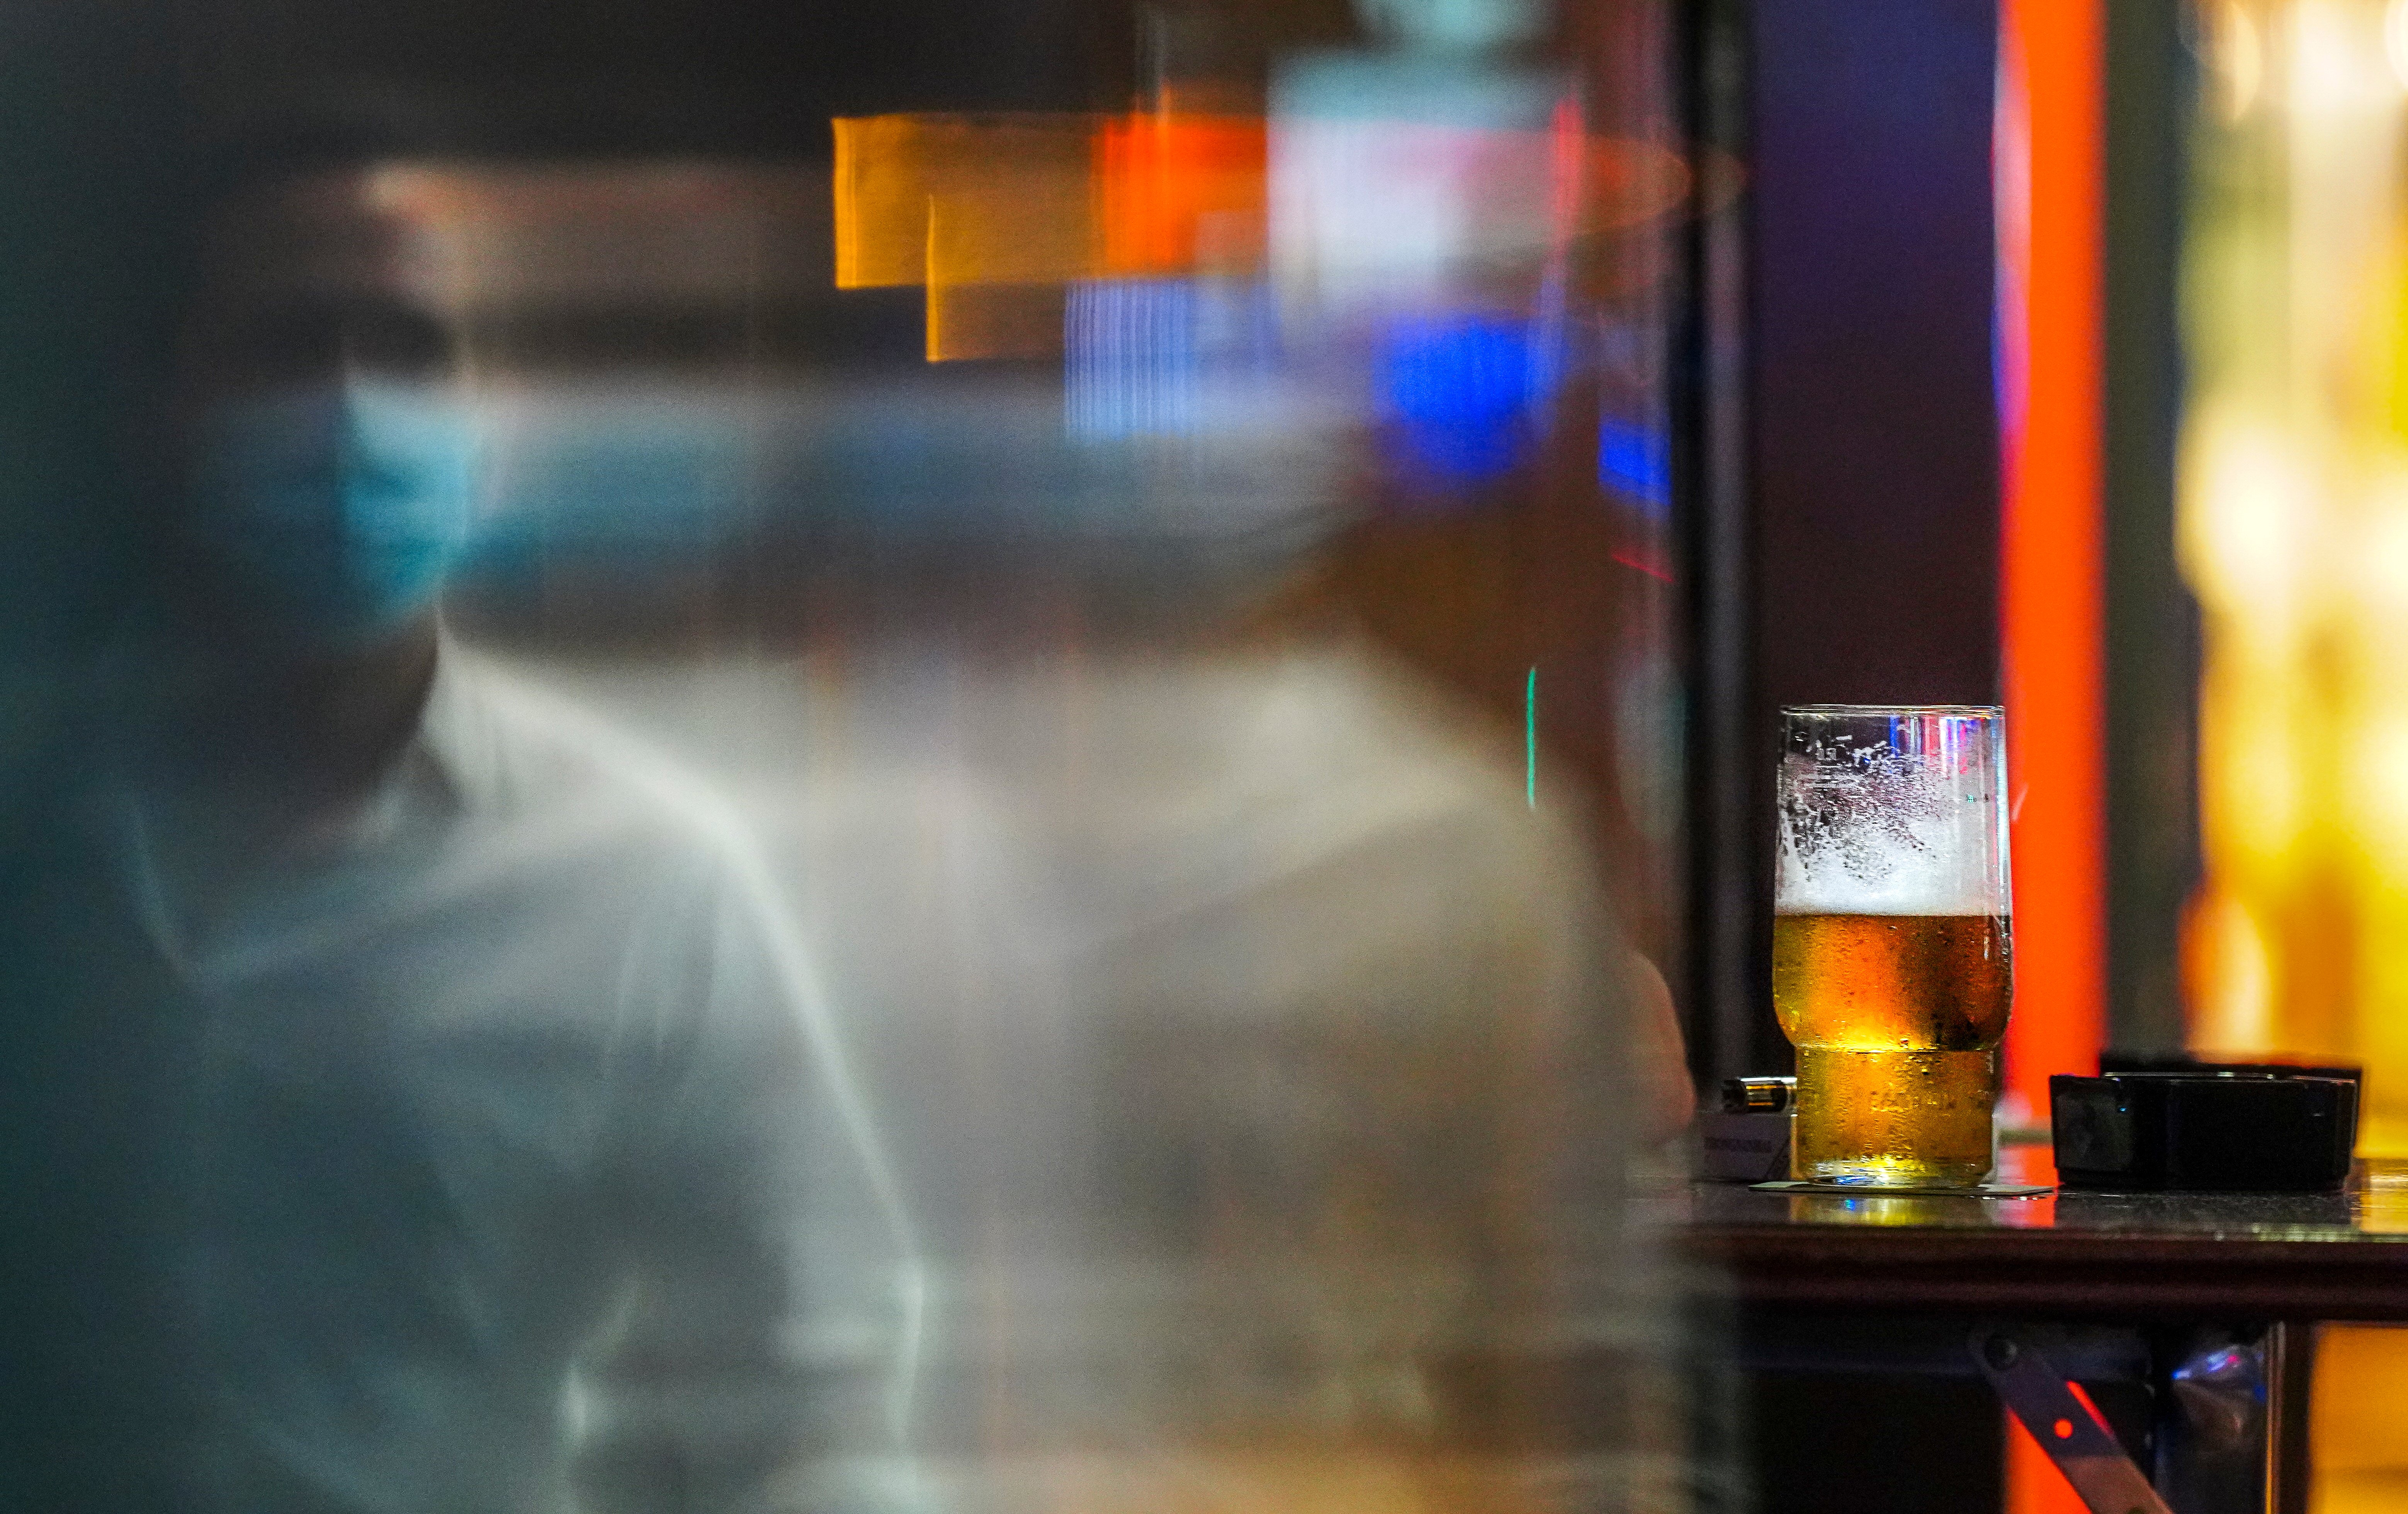 Hong Kong, known for its dazzling array of pubs, is banning alcohol sales at bars and restaurants to try to curb the spread of the coronavirus. Photo: Sam Tsang